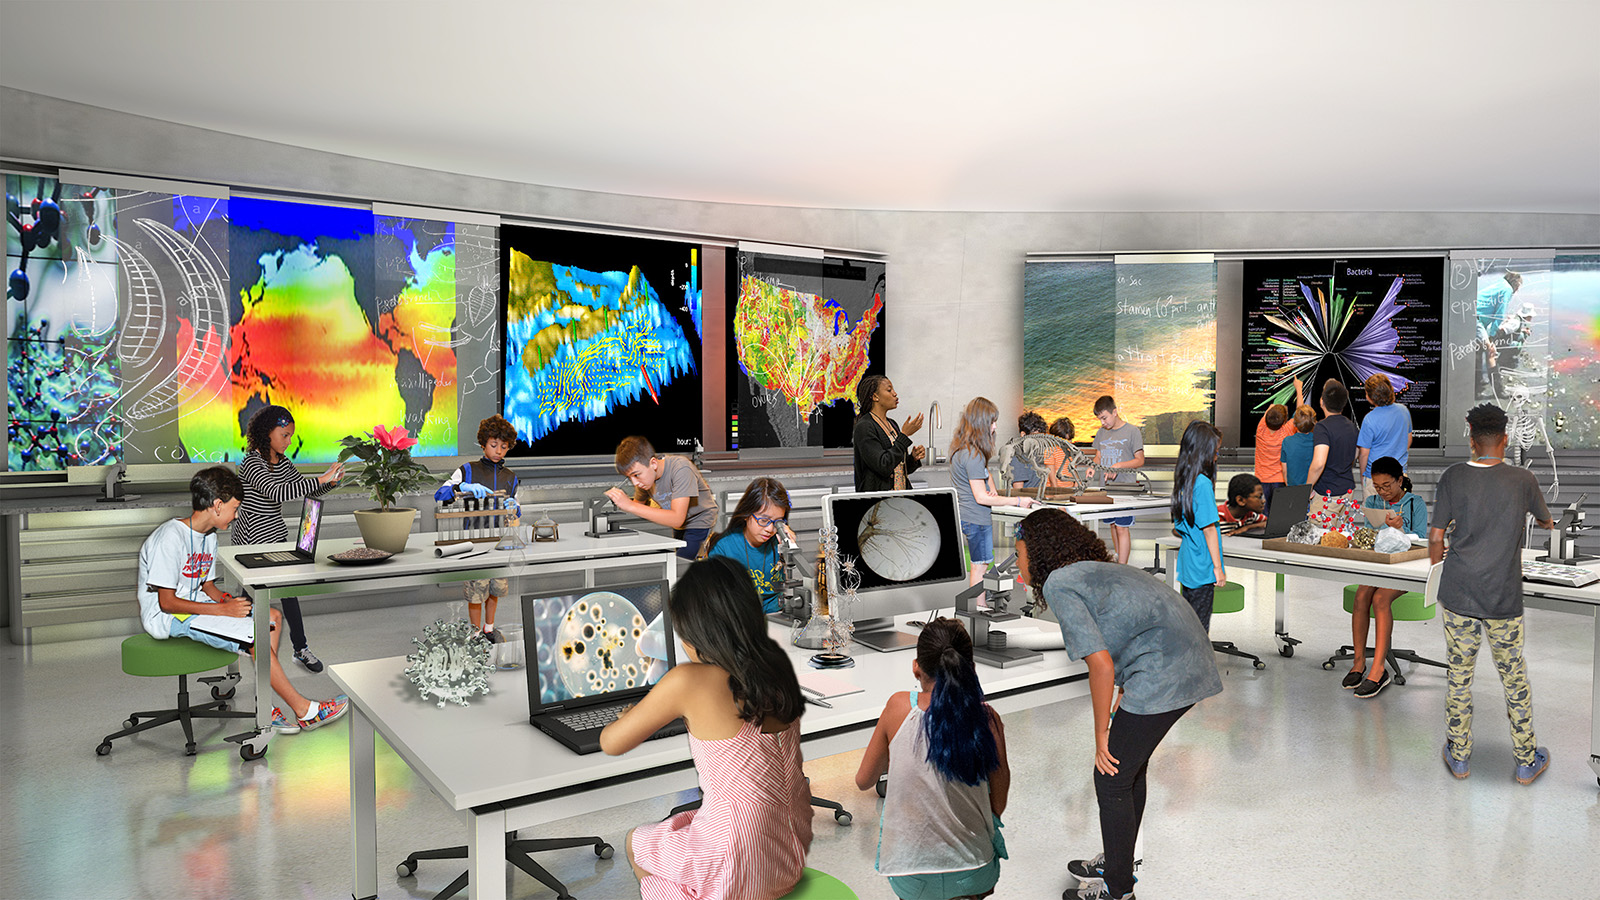 Rendering shows an open space with students and teachers surrounded by desktop and wall-mounted digital screens displaying bright visuals.